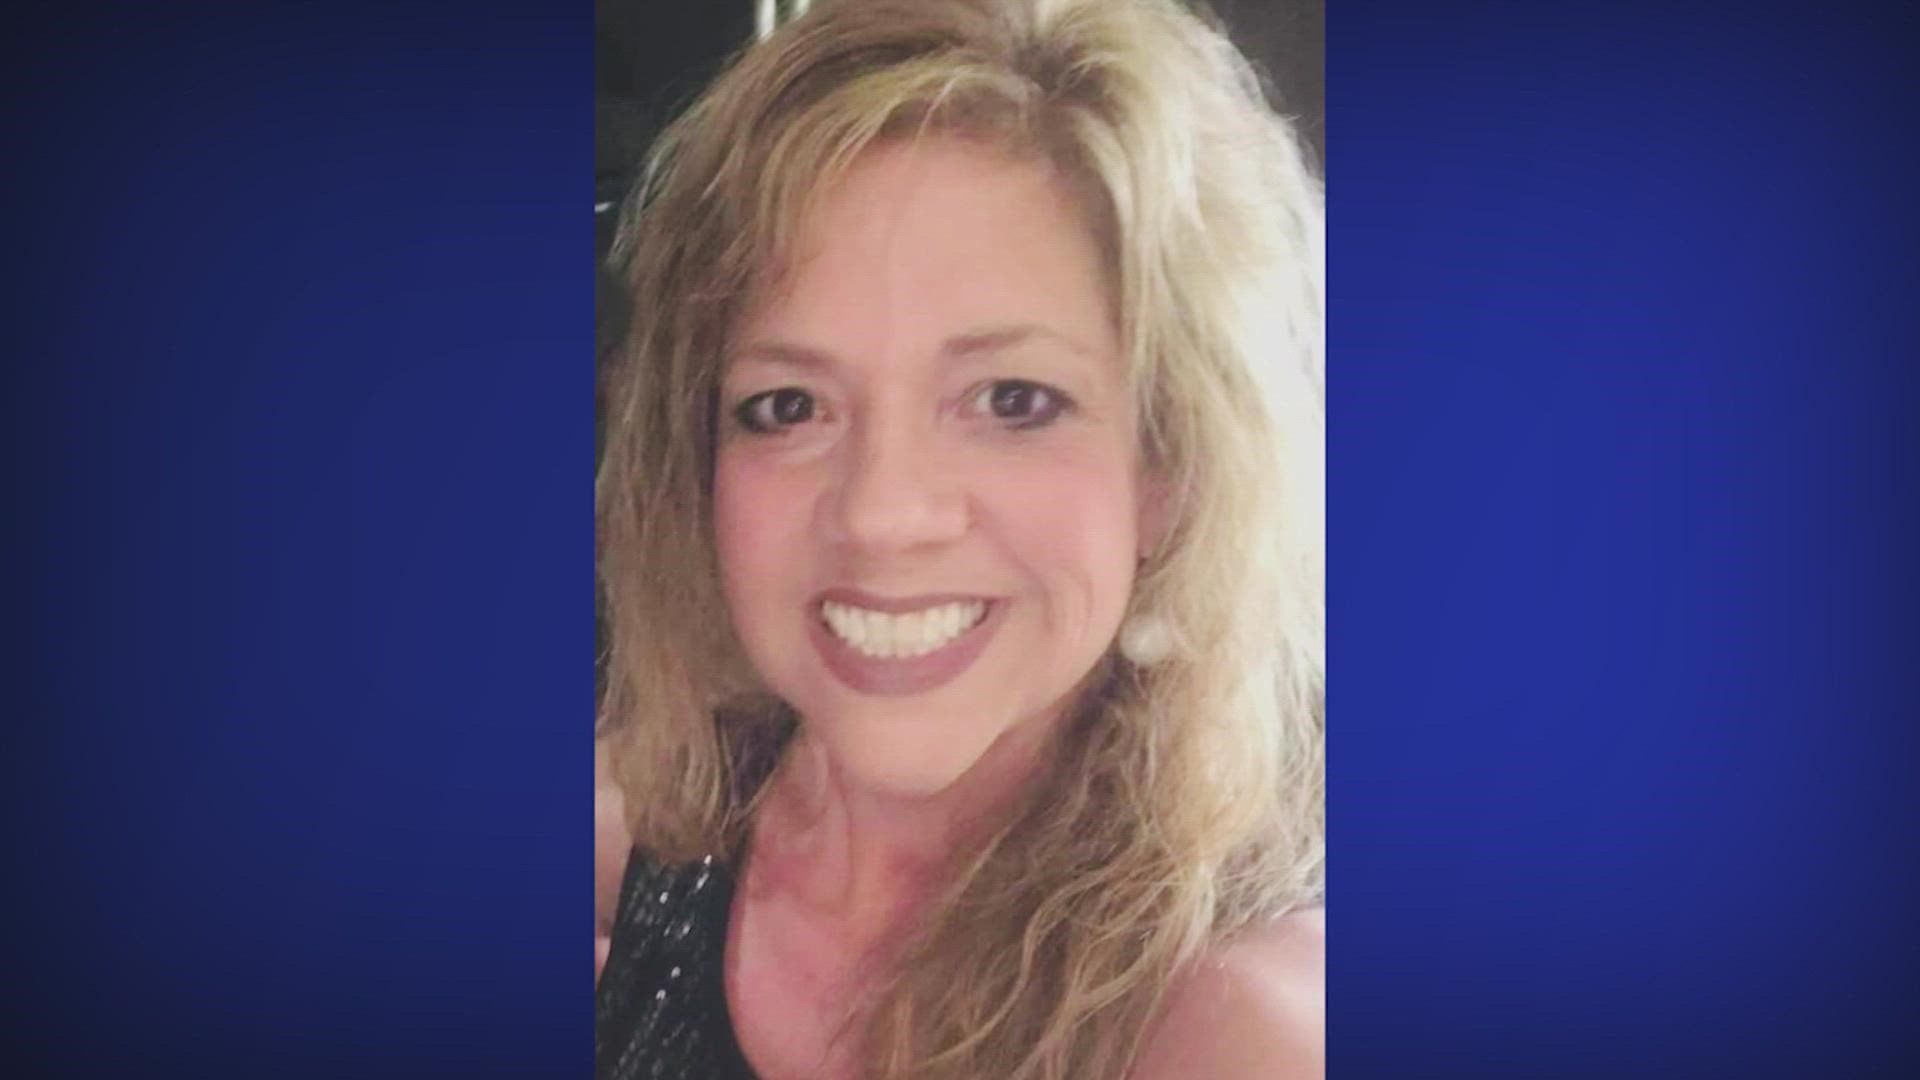 Michelle Reynolds has not been seen since Thursday, but her car has been located in New Orleans, according to her husband.